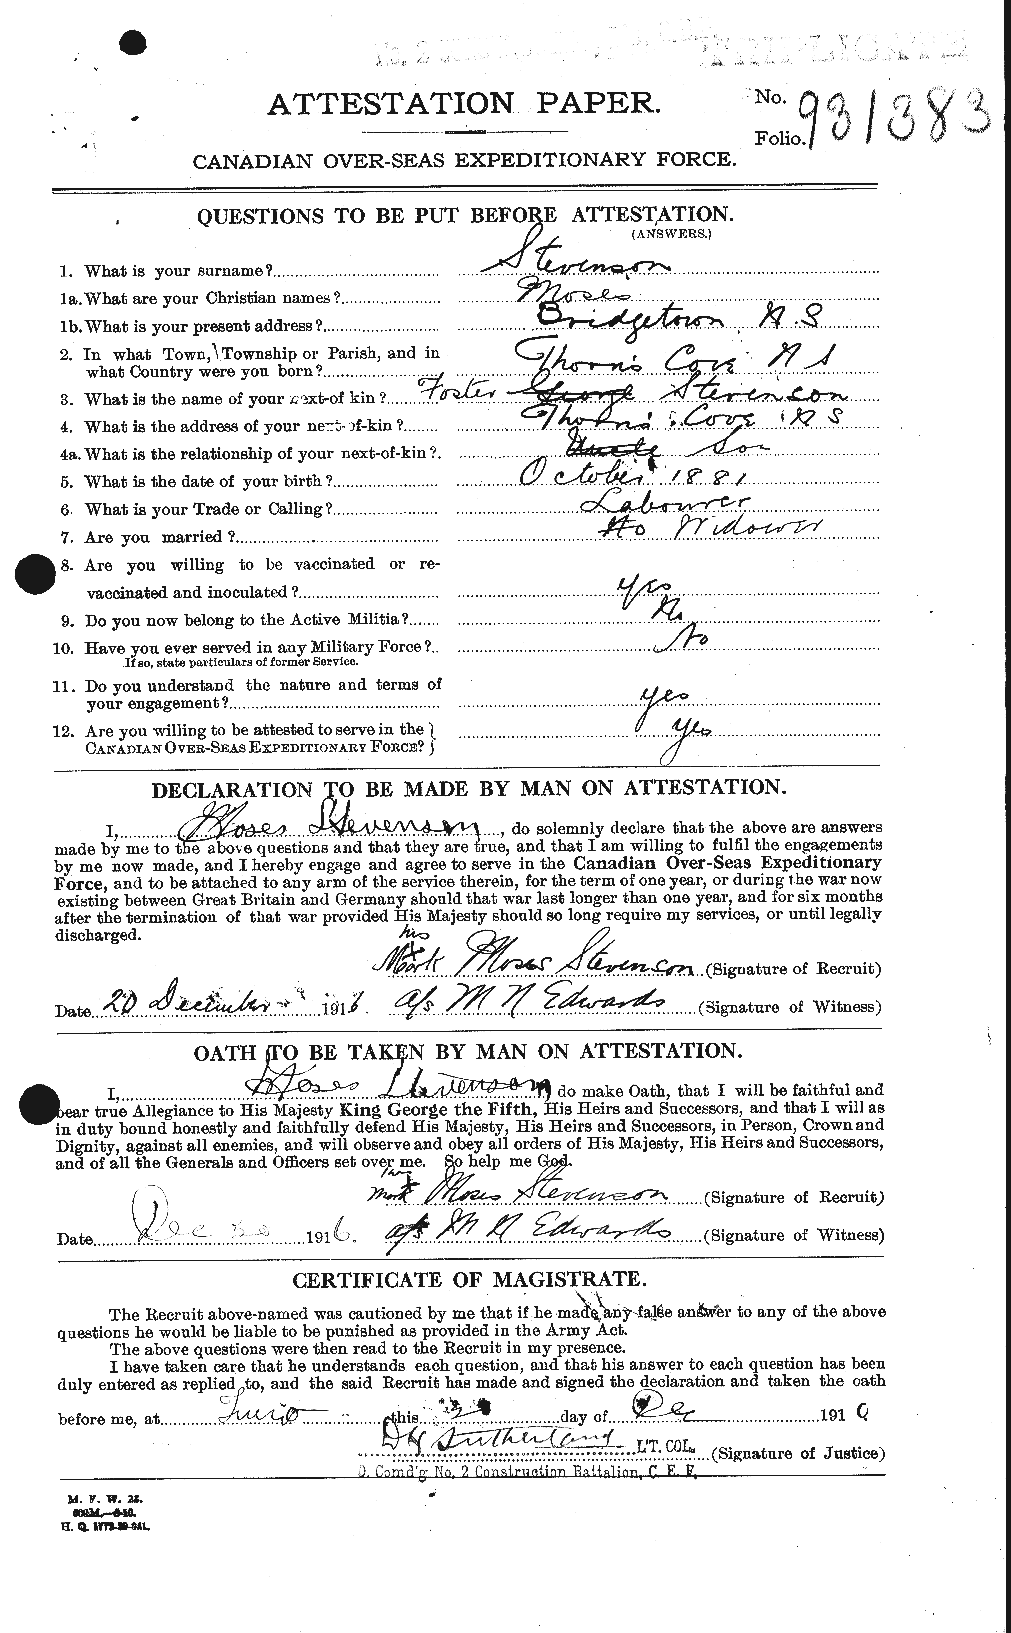 Personnel Records of the First World War - CEF 118918a